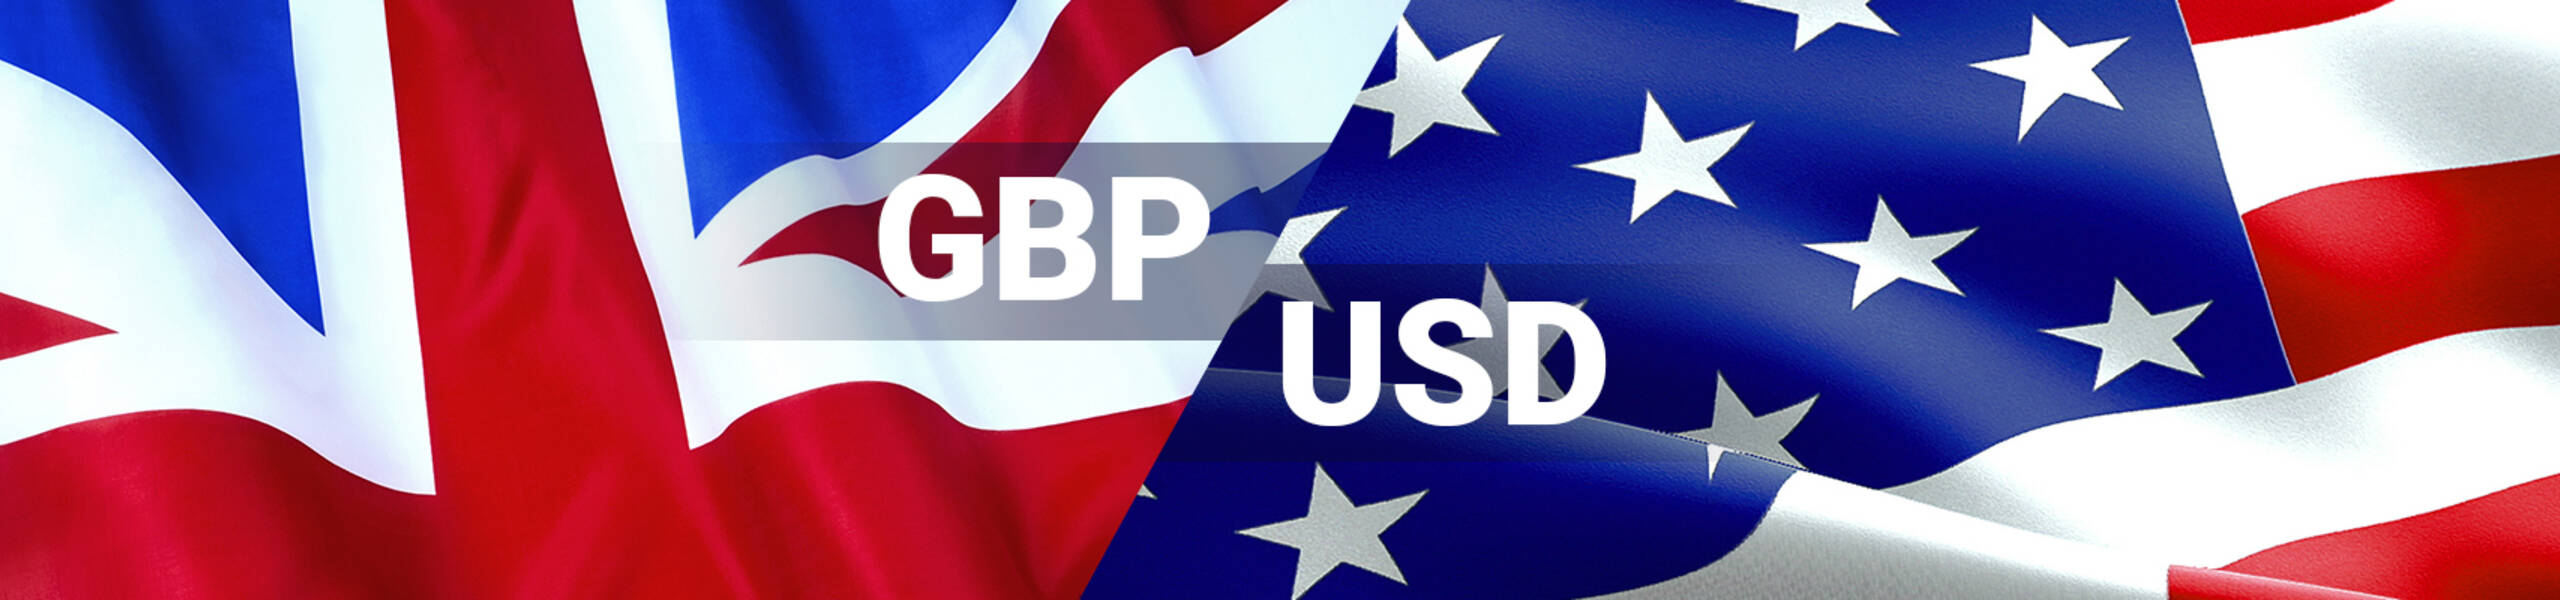 GBP/USD: pound is in consolidation under Cloud